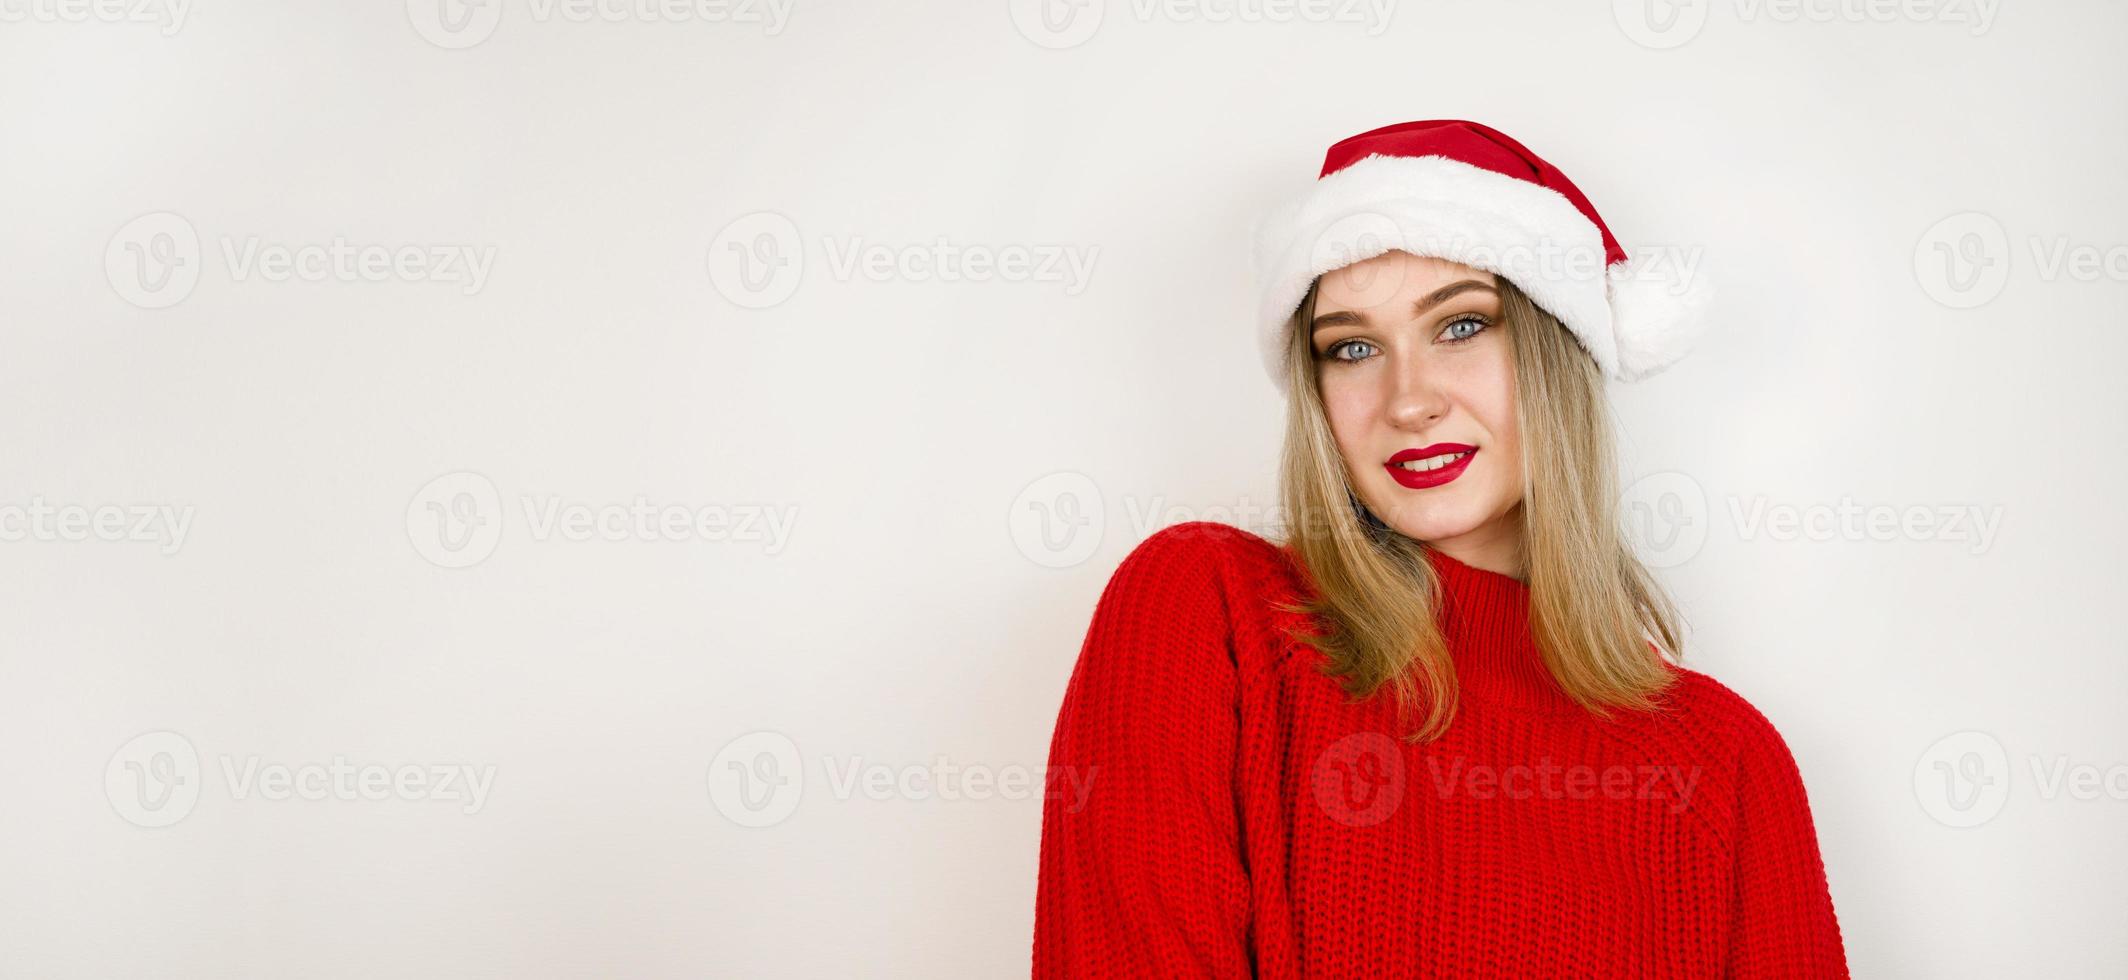 December christmas banner with copy space. Young happy blonde girl smiling wearing red sweater and santa hat photo